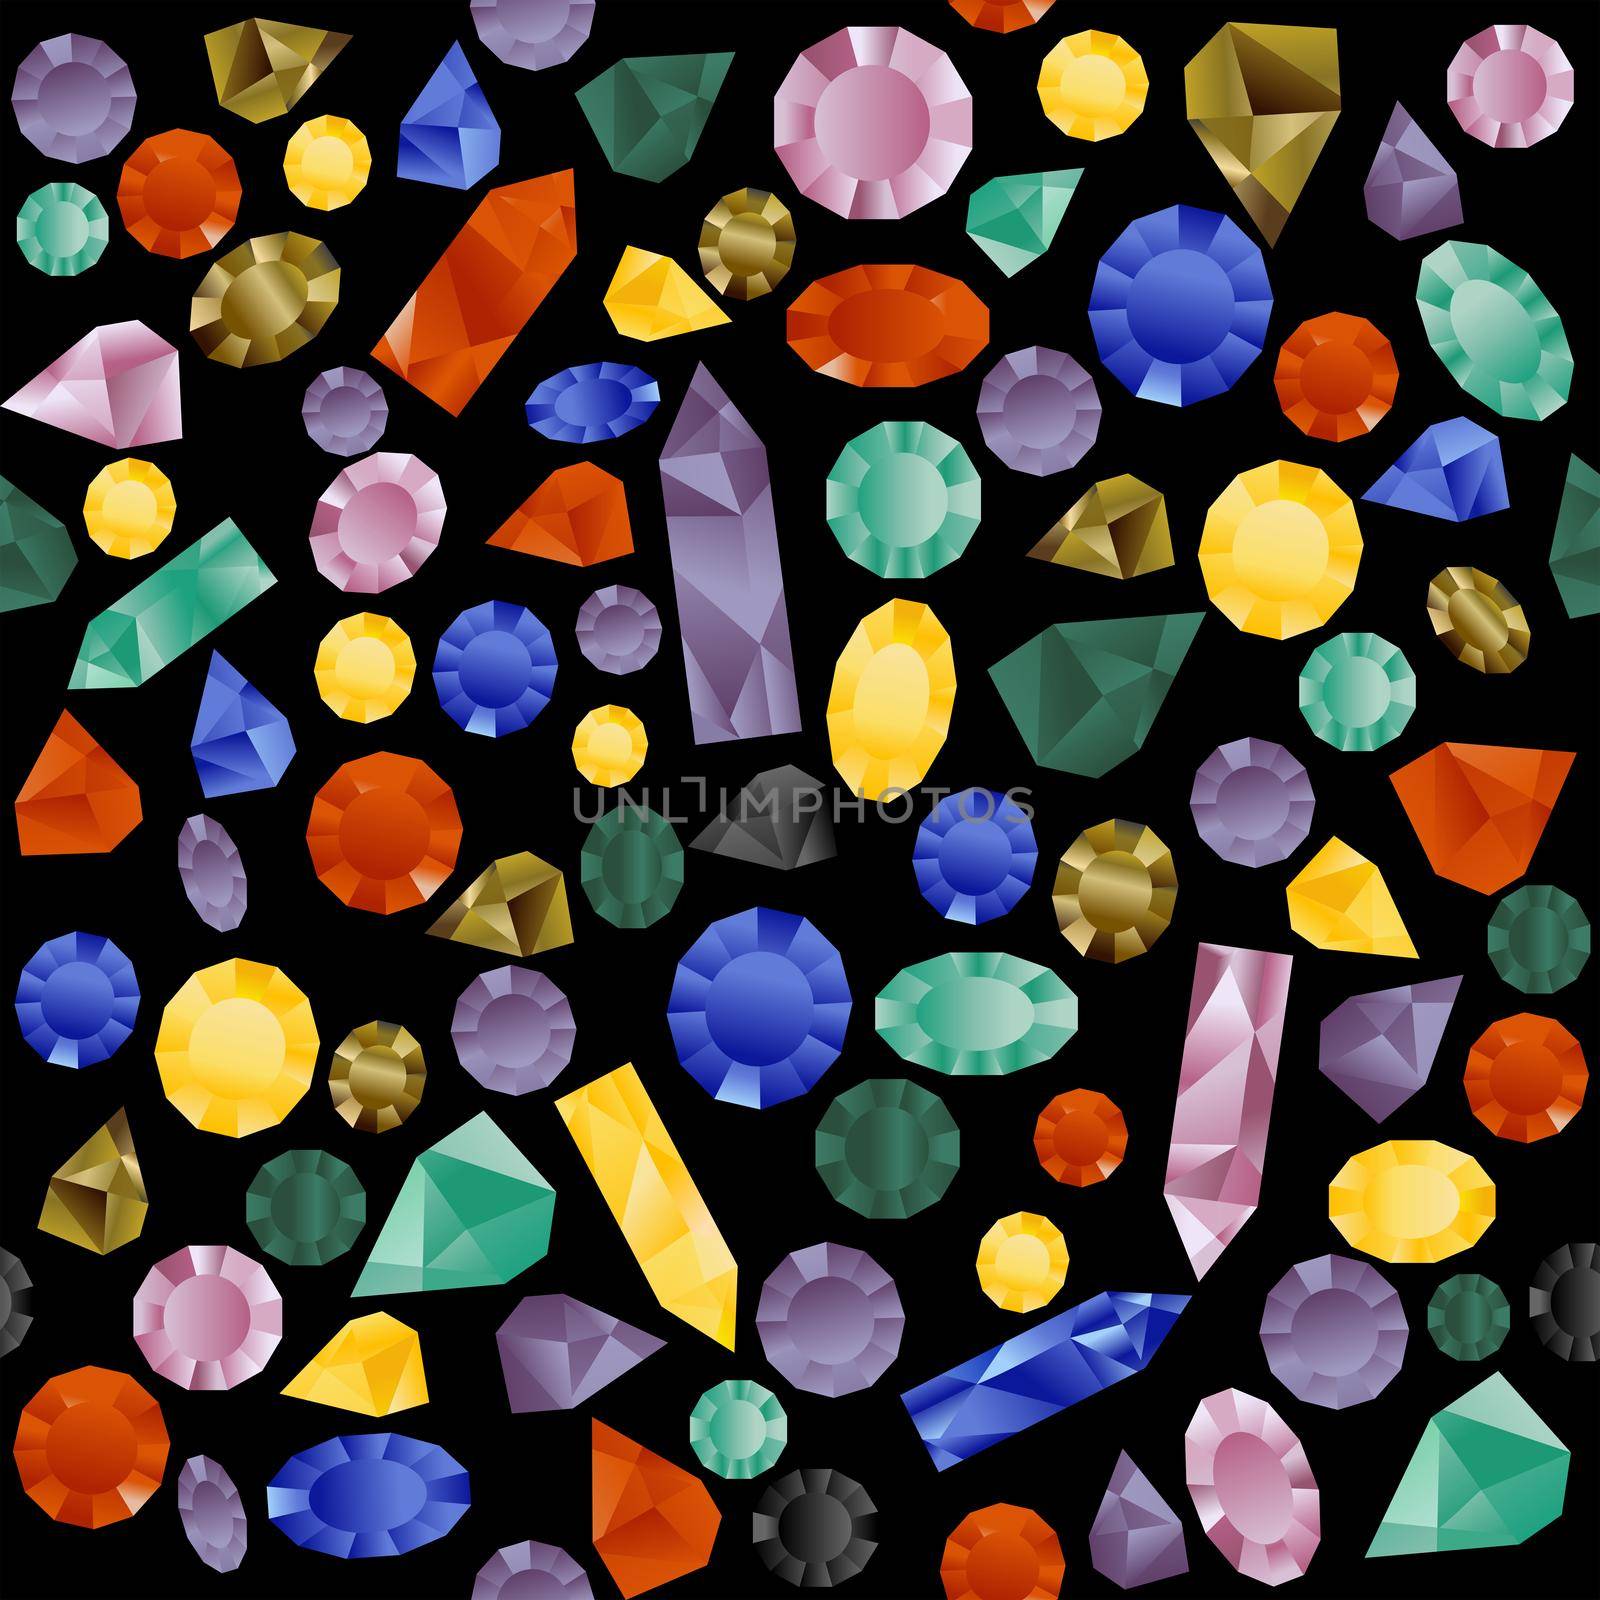 Colorful seamless pattern with gemstones on black background by hibrida13